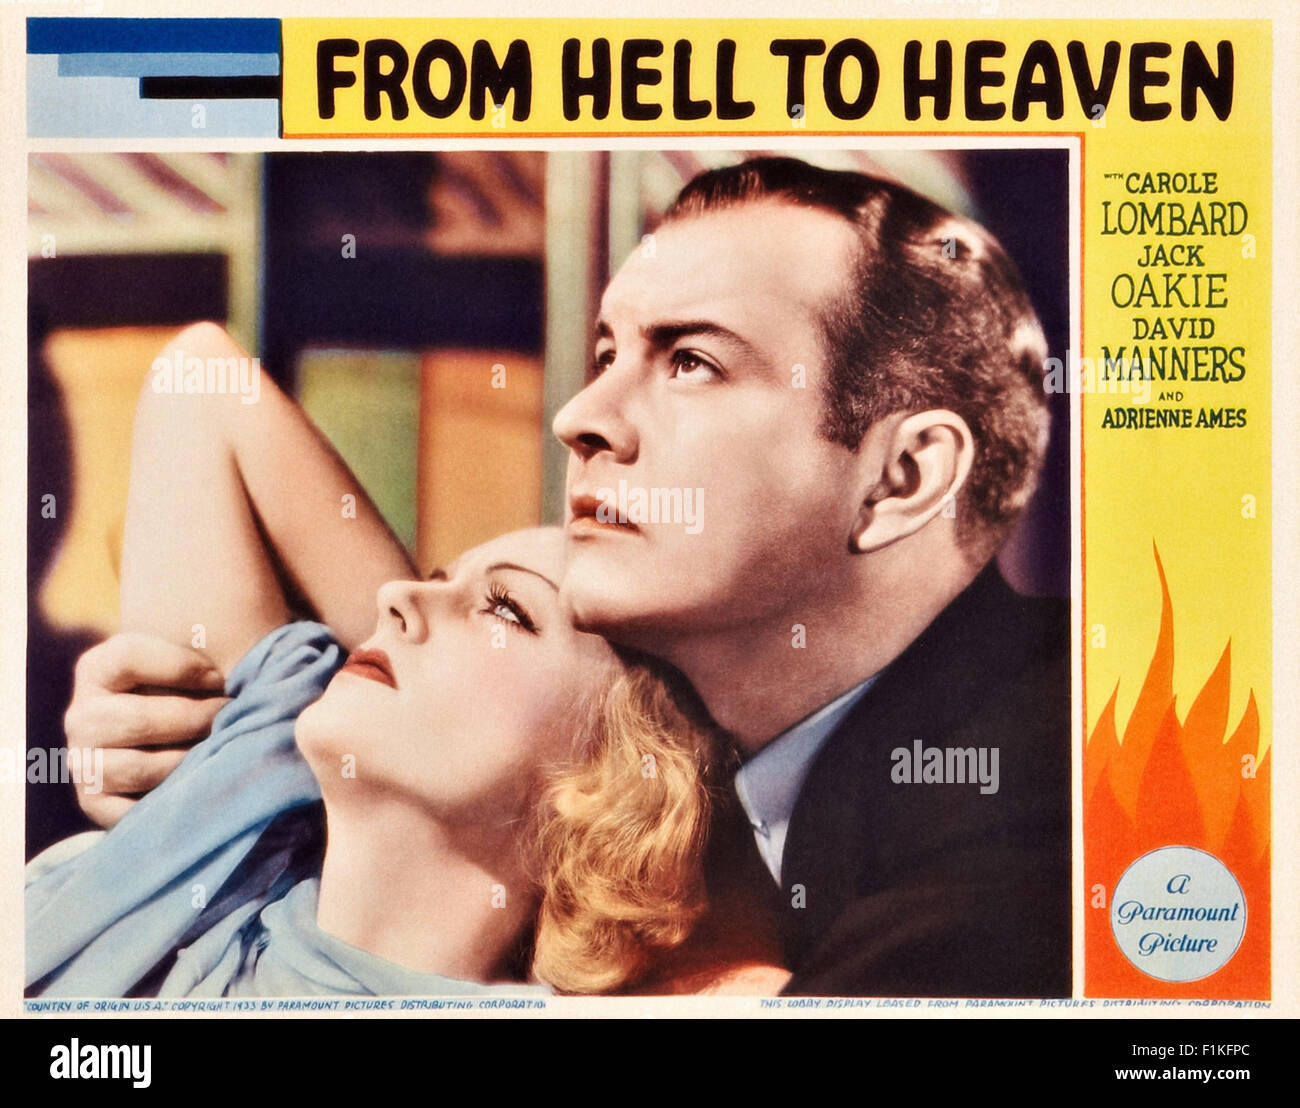 From Hell to Heaven 001 - Movie Poster Stock Photo